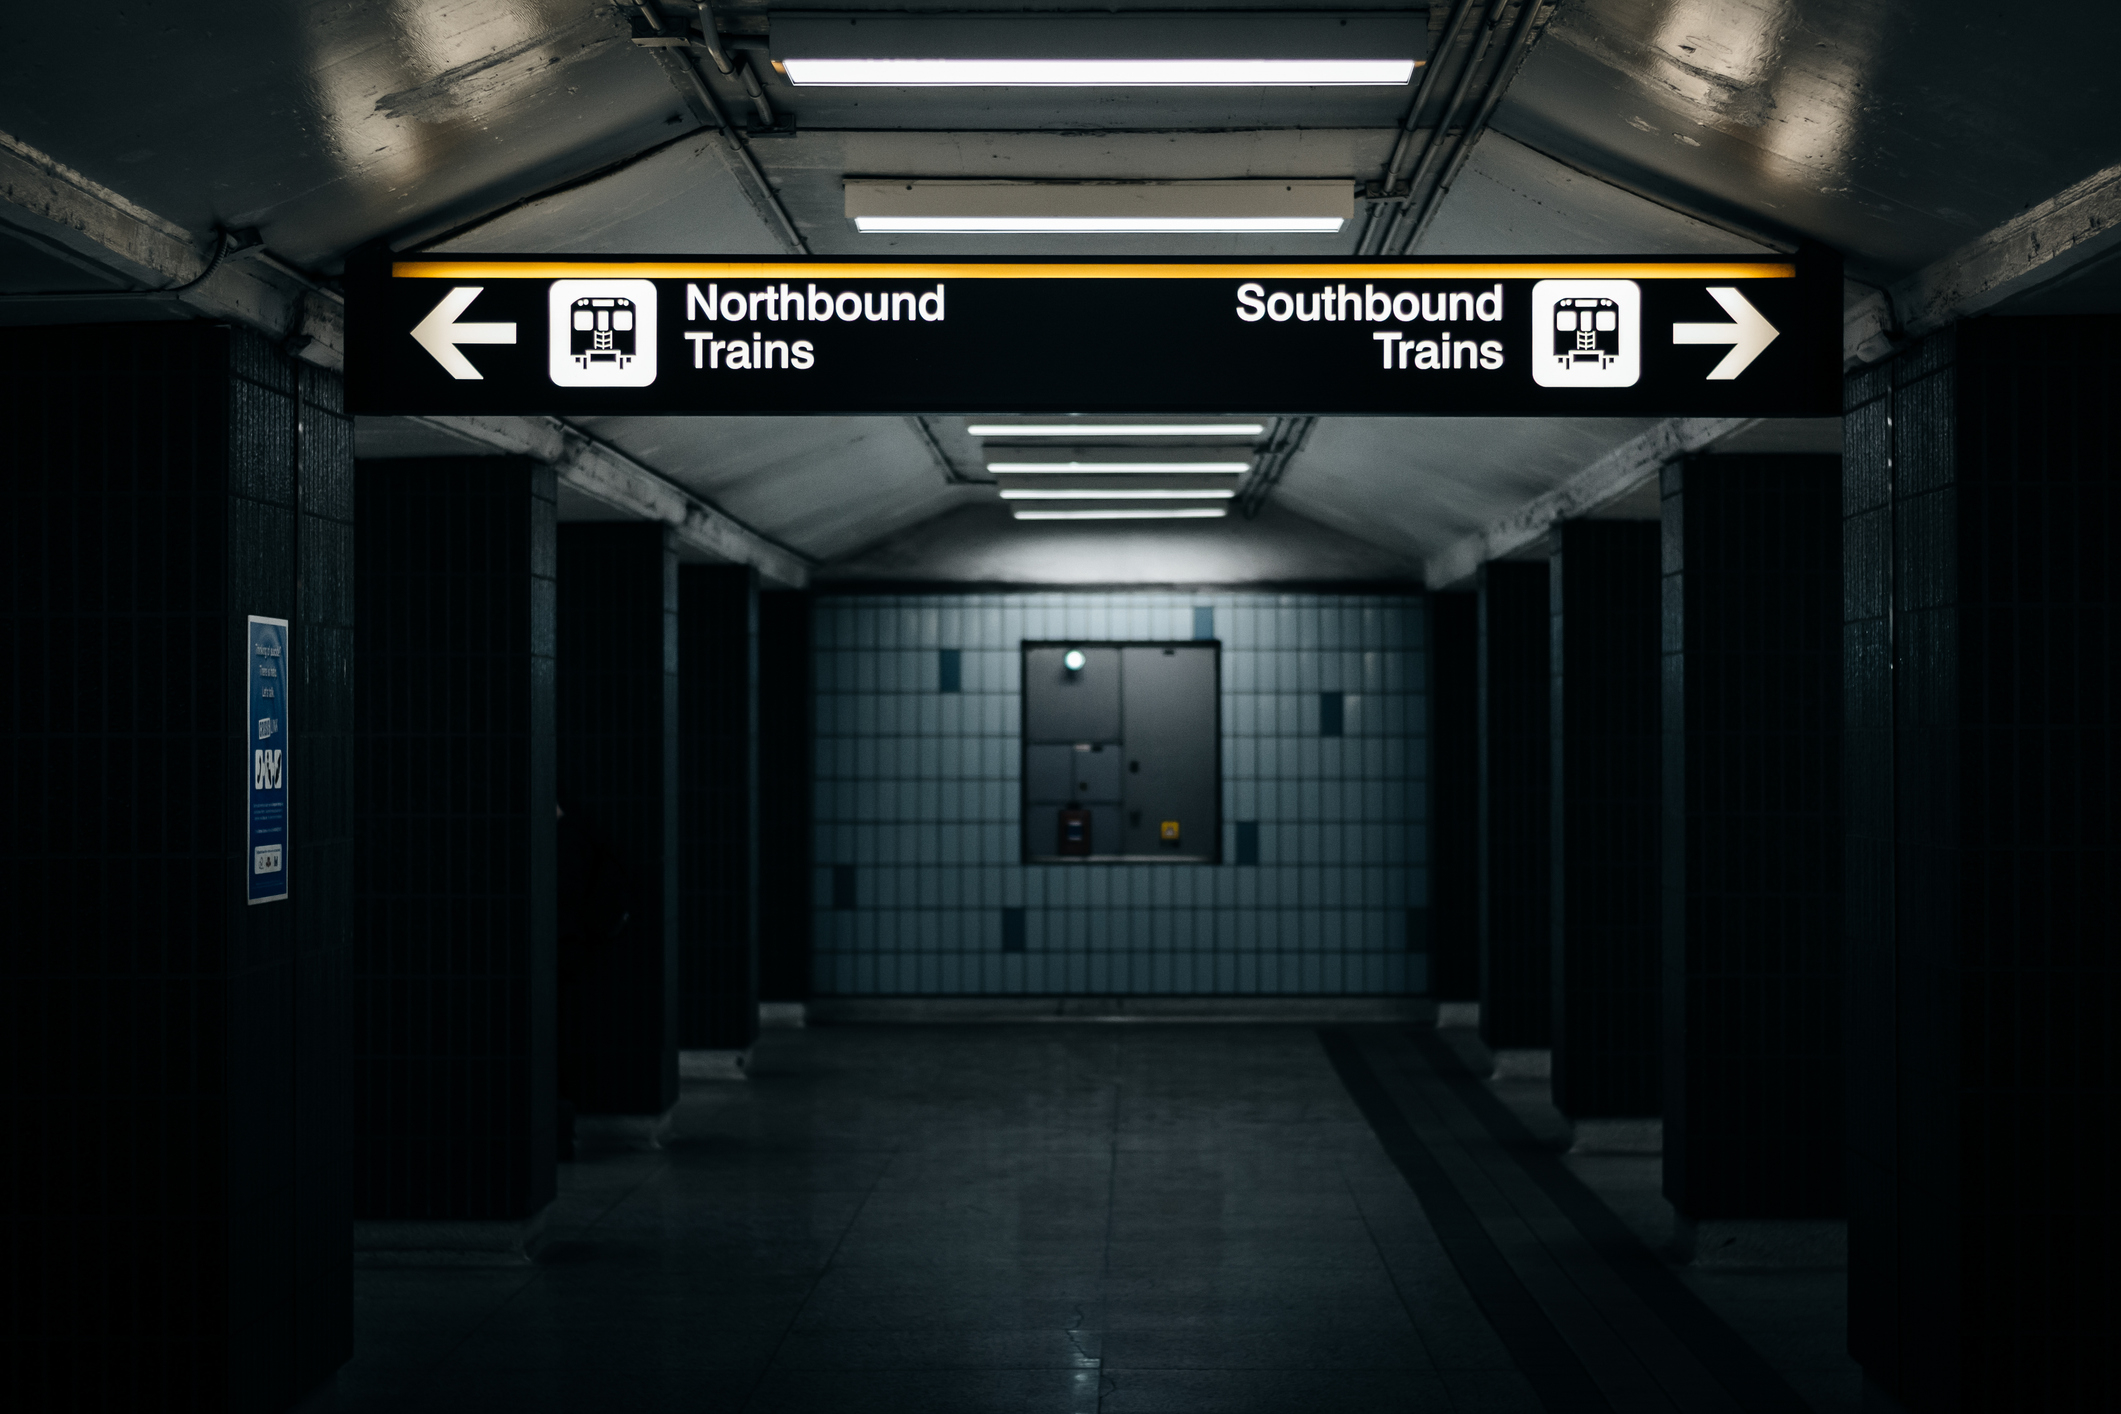 A dimly lit subway station with signs pointing to Northbound and Southbound trains